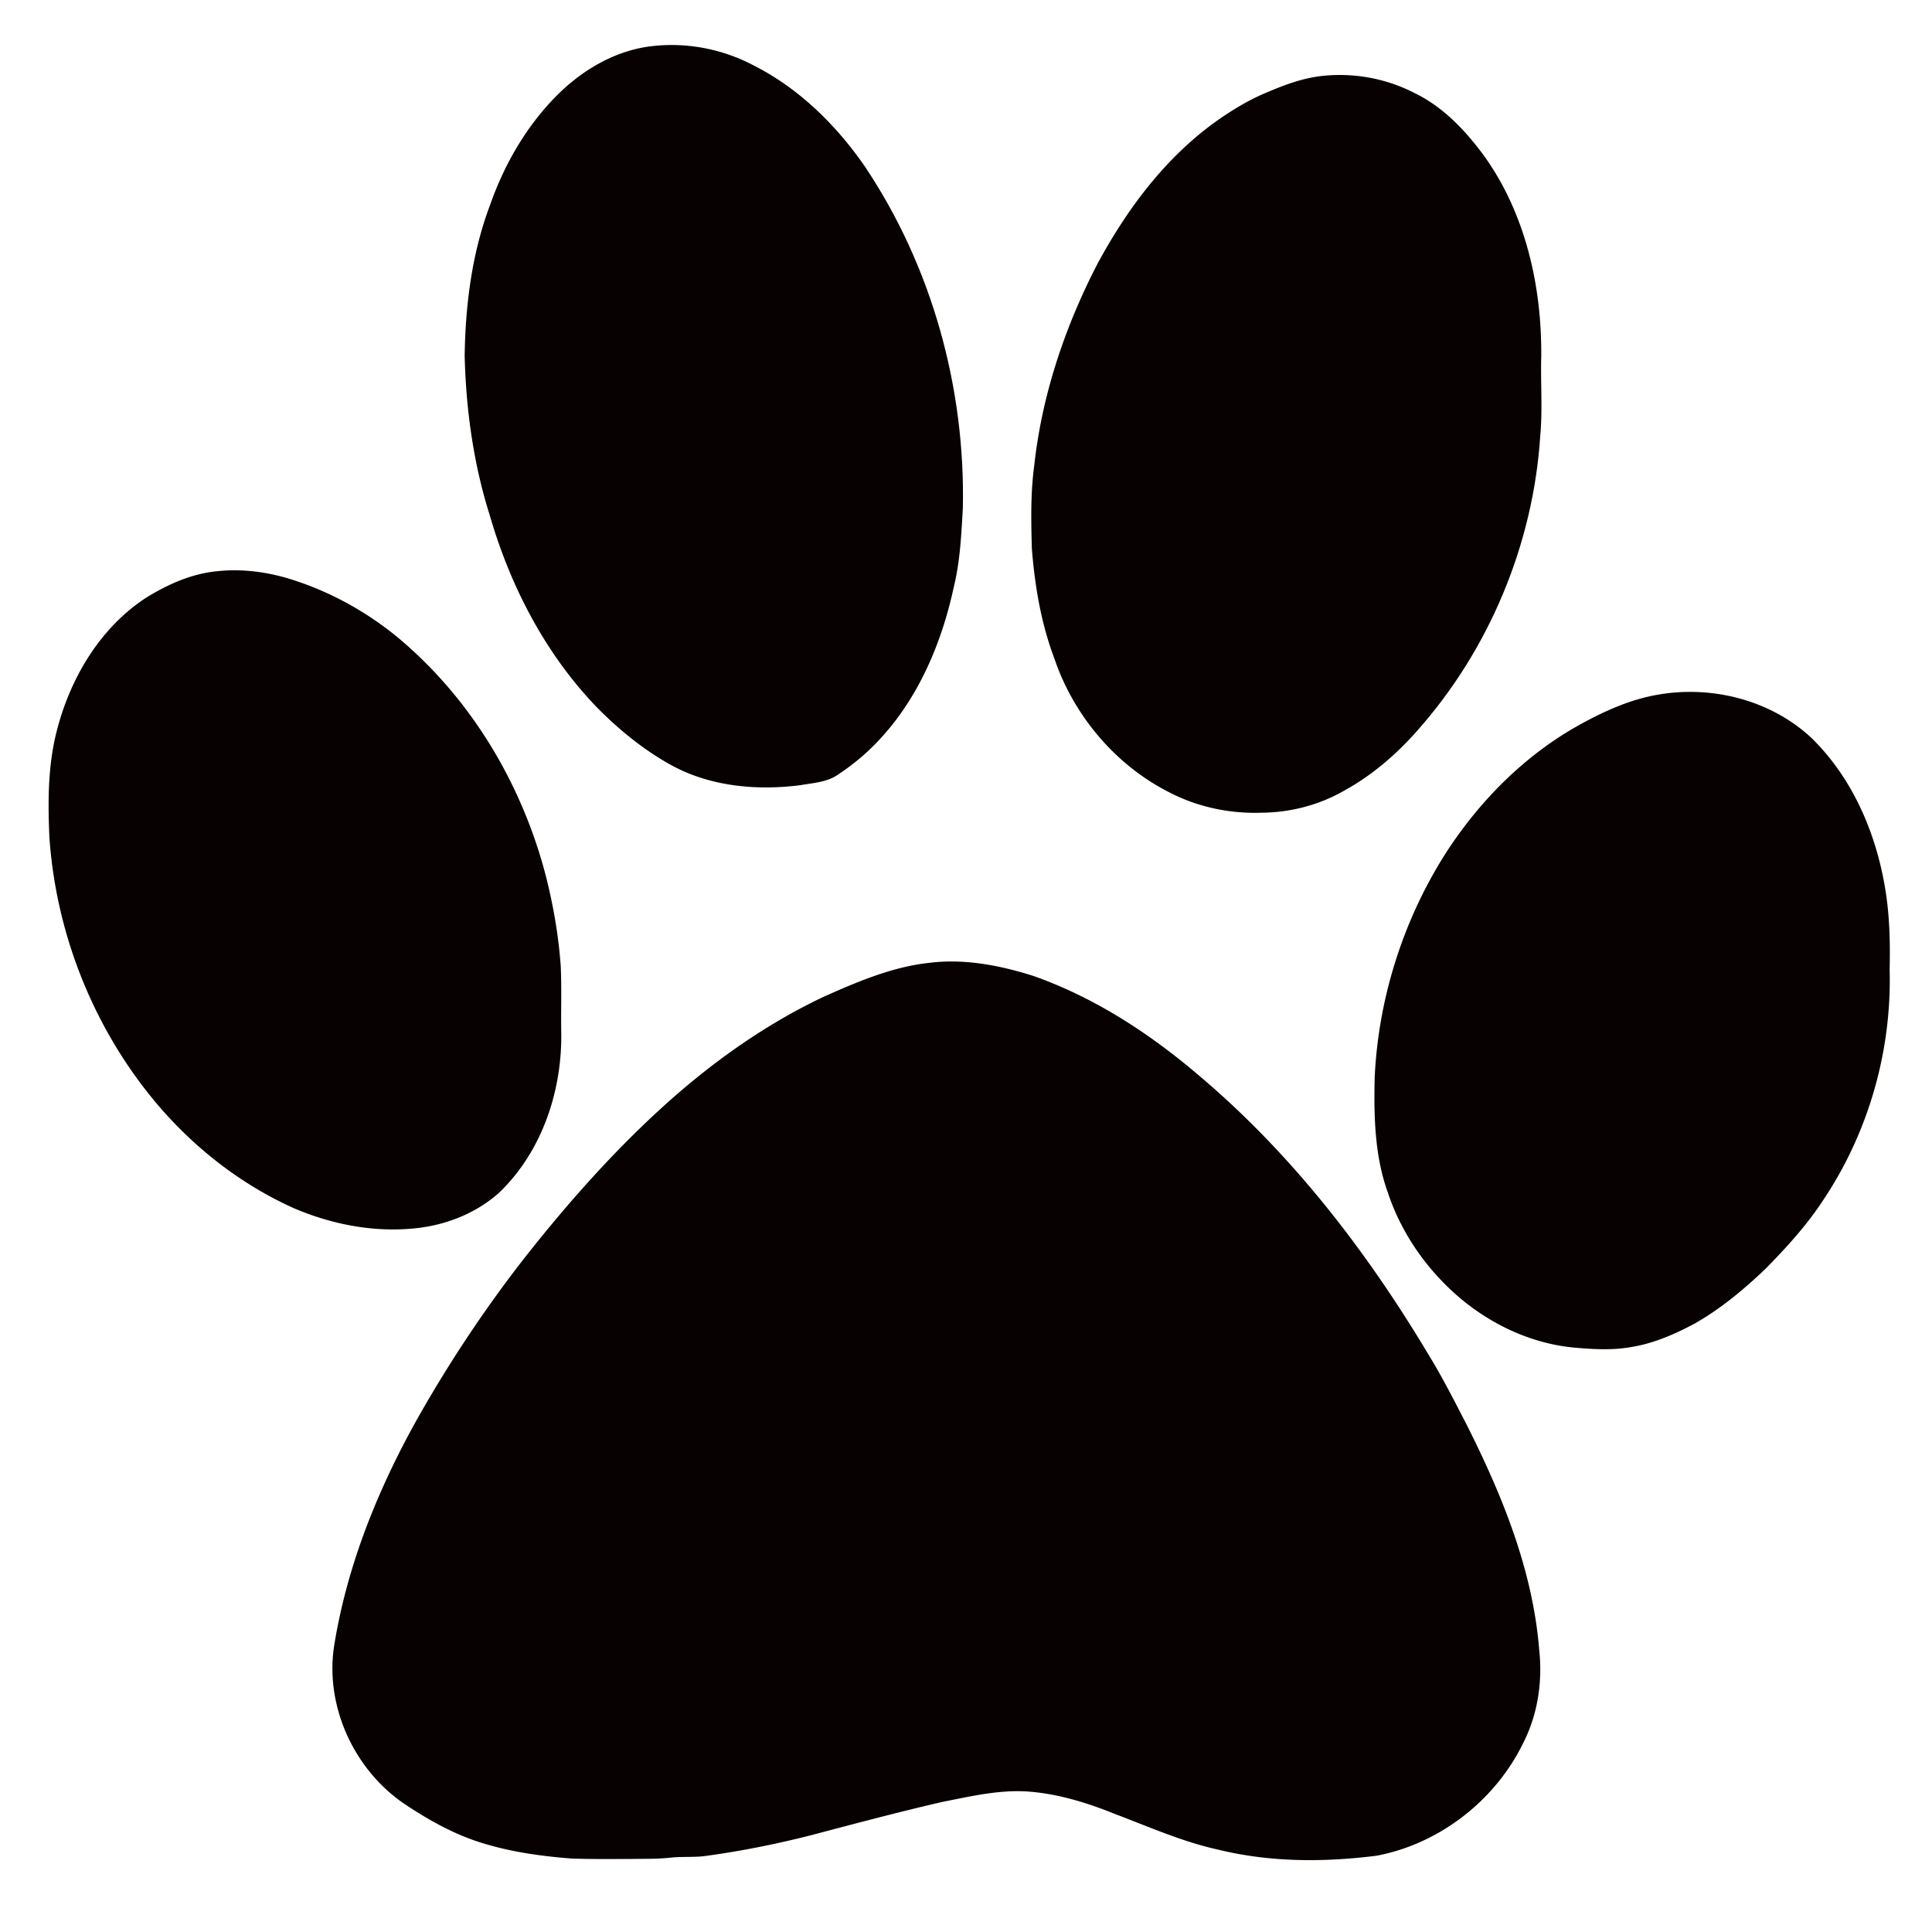 Hand clipart dog. Panther paw print clip